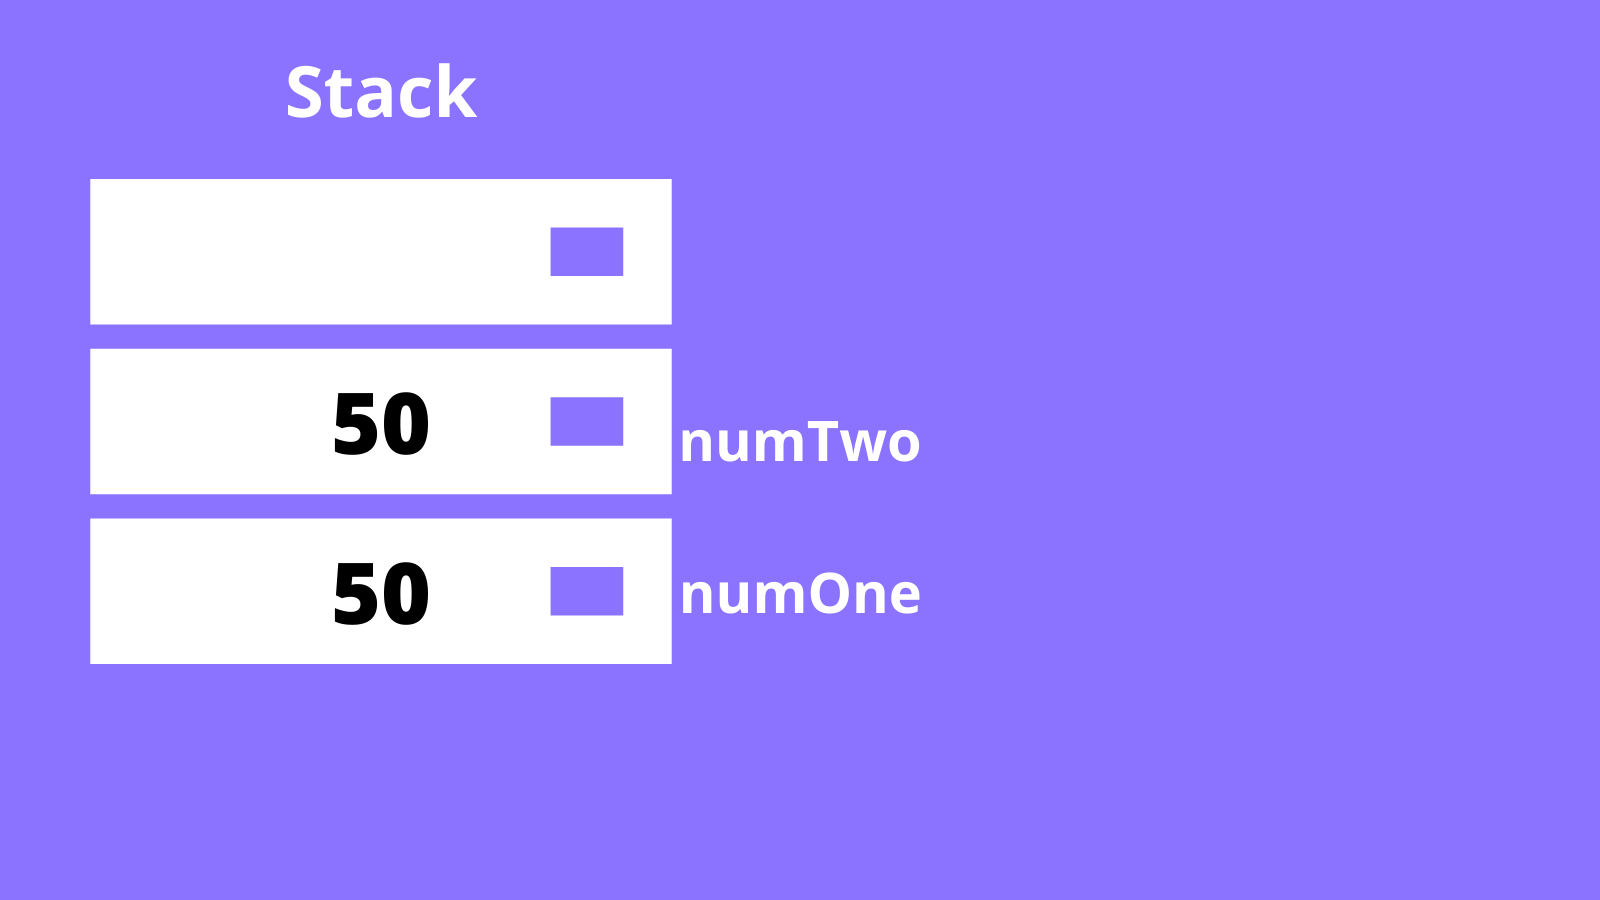 Storing data on the stack